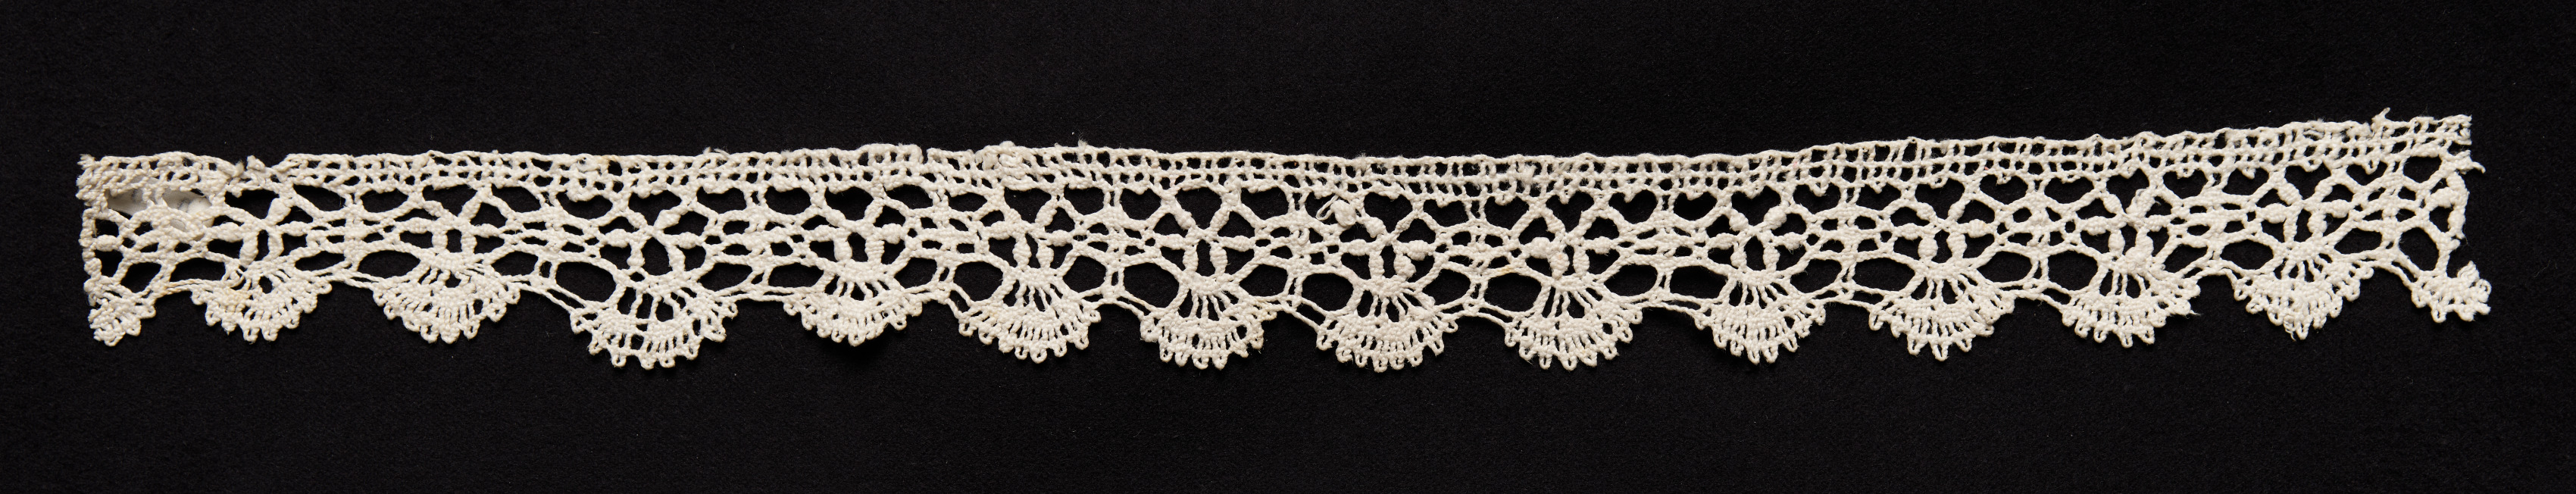 Bobbin Lace (Needlepoint Design) Edging of Bell Points